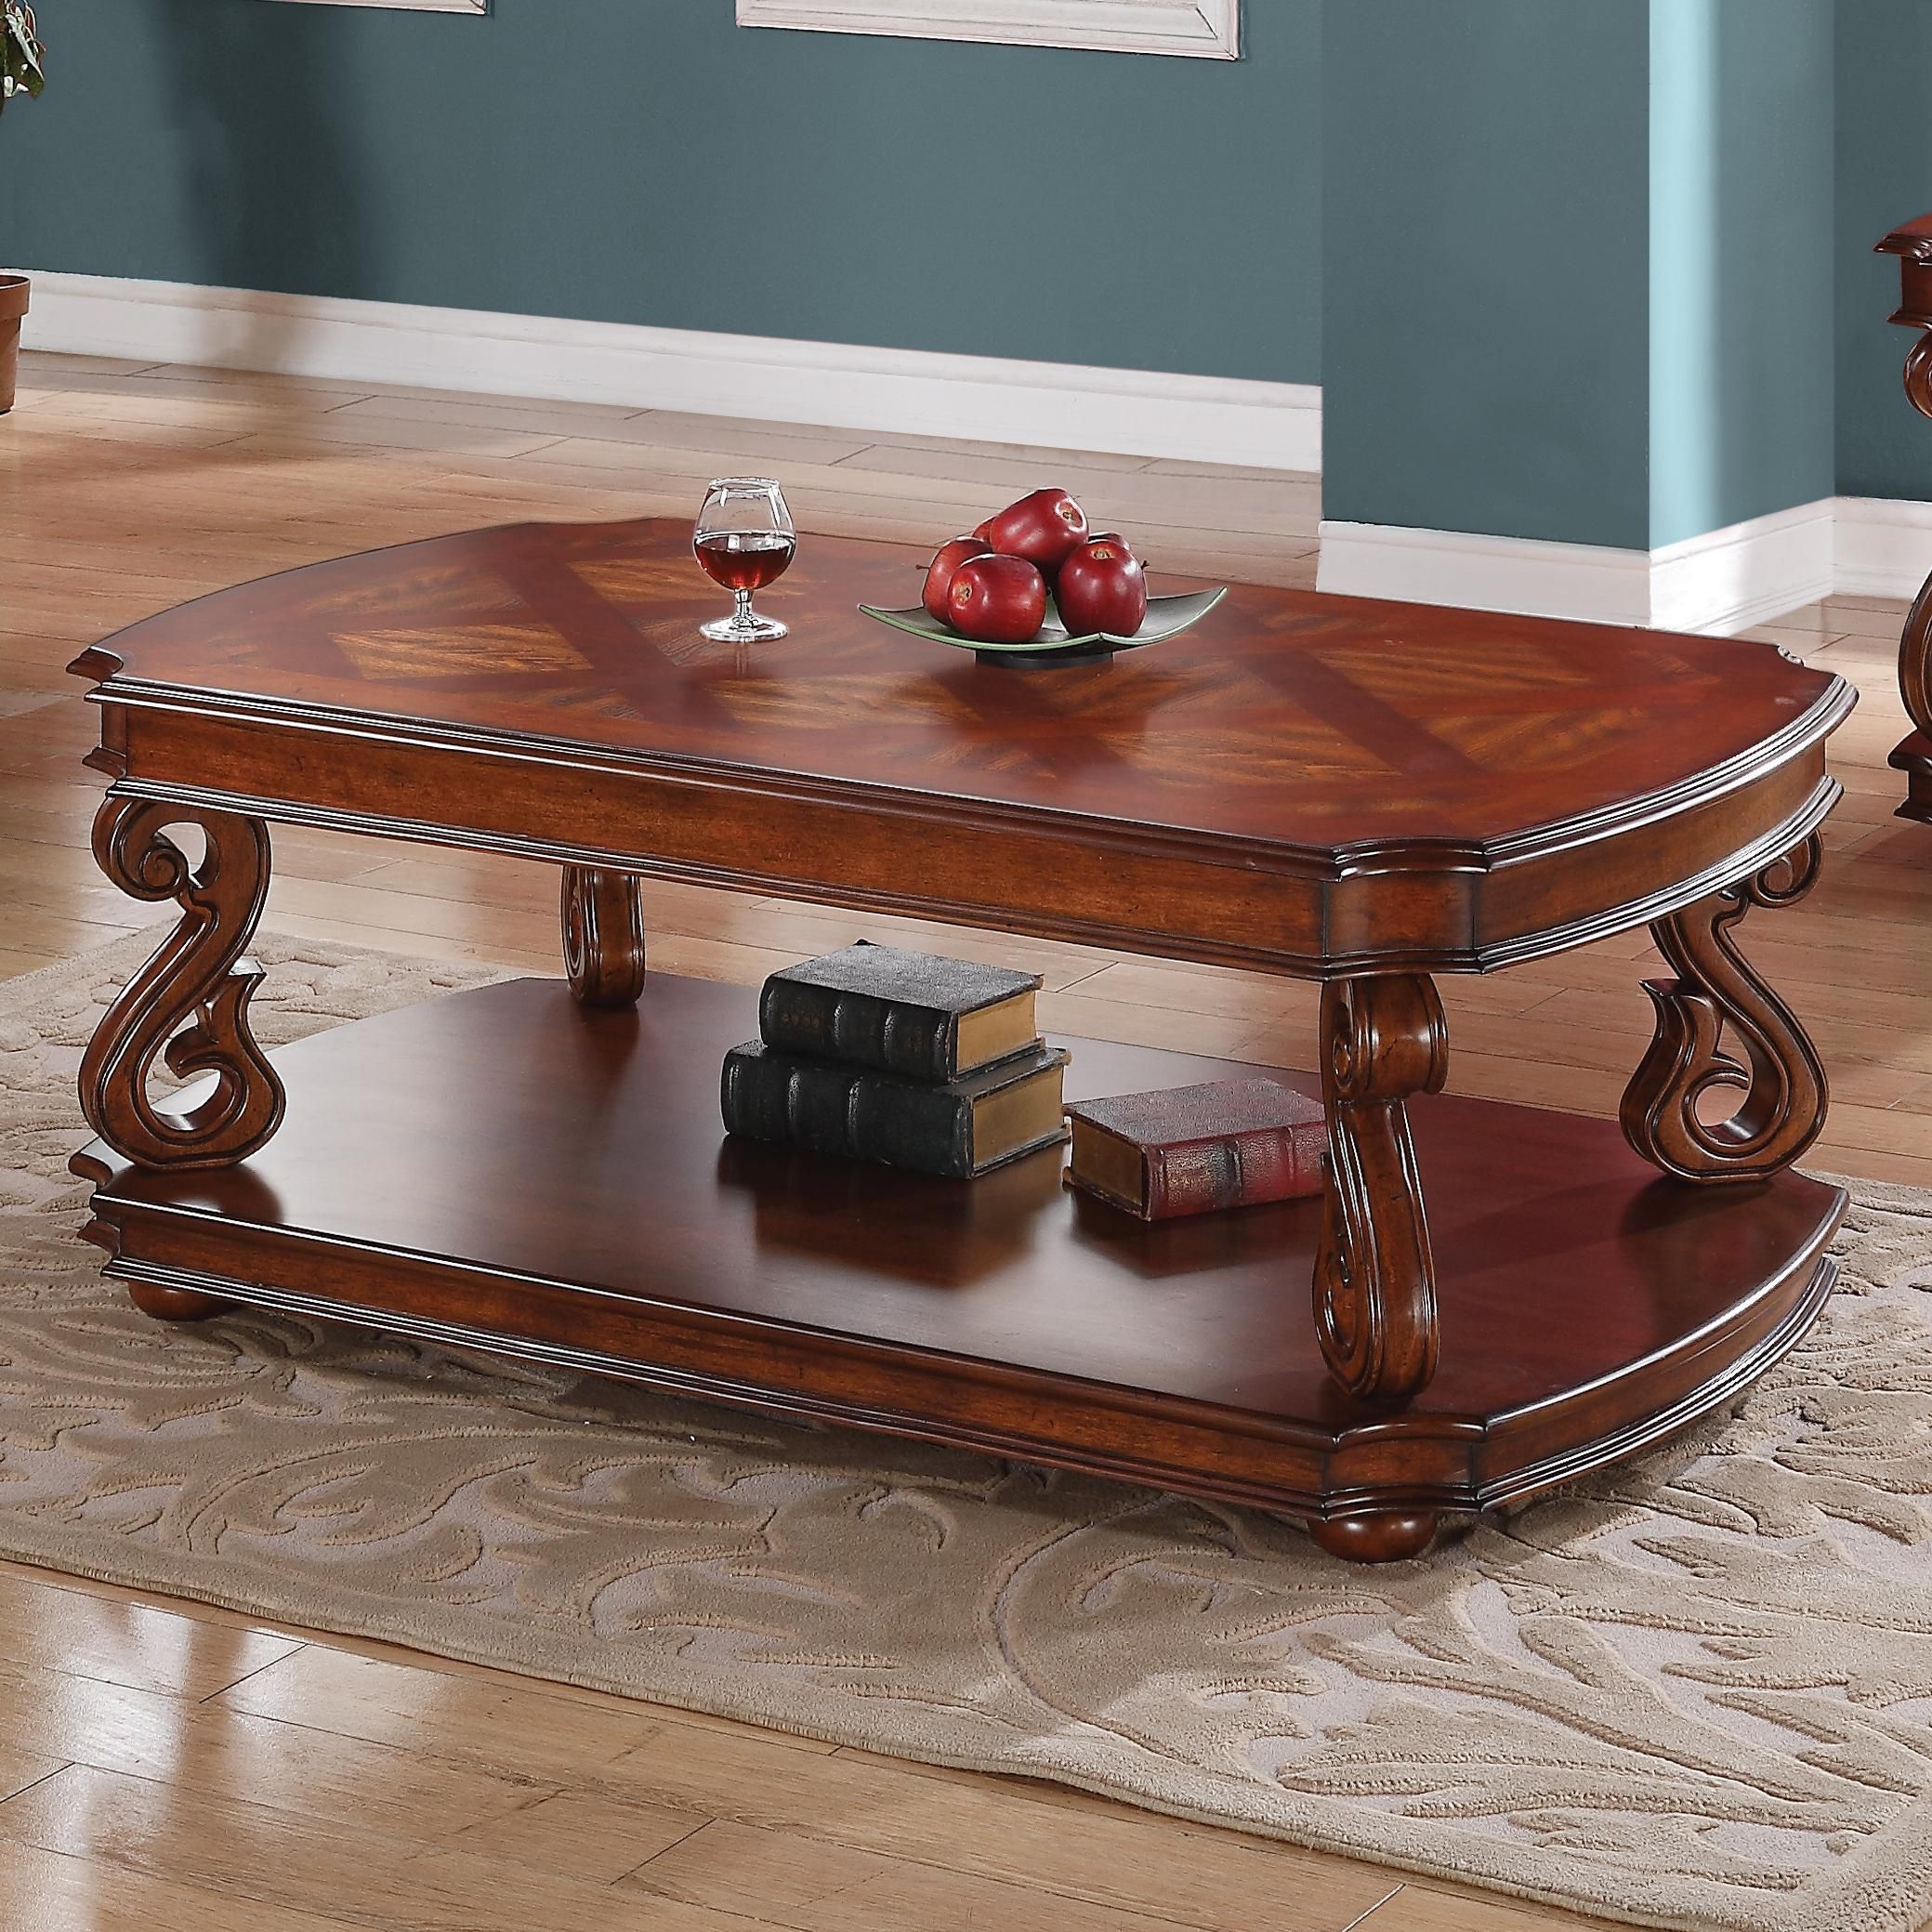 Occasional Group Traditional Coffee Table With Parquet Veneers In Dark  Cherry Finish | Quality Furniture At Affordable Prices In Philadelphia Main  Line Pa With Regard To Dark Cherry Coffee Tables (View 4 of 15)